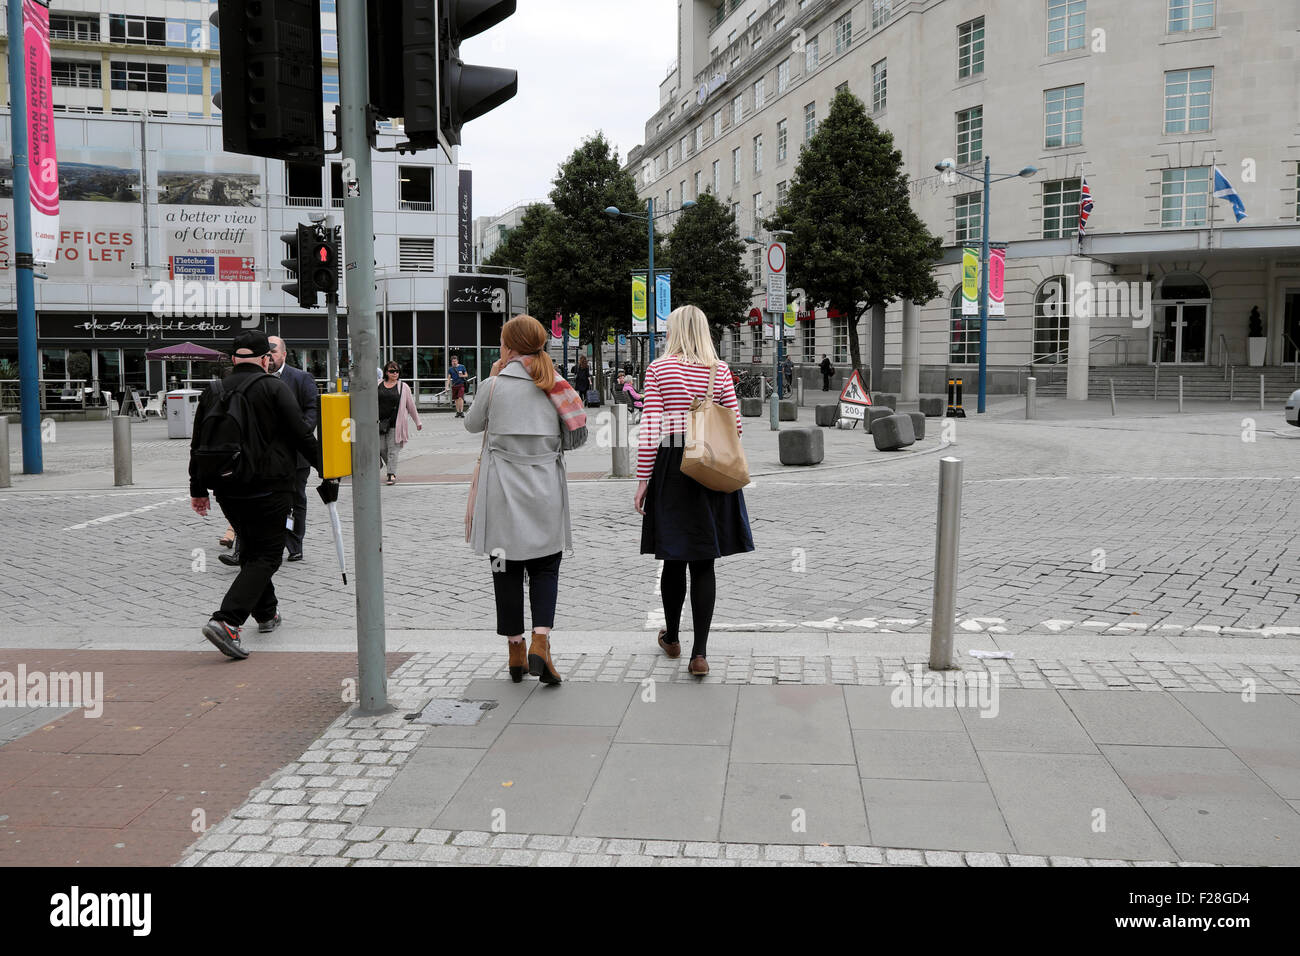 Women waiting to cross the street at traffic lights in Cardiff, South ...